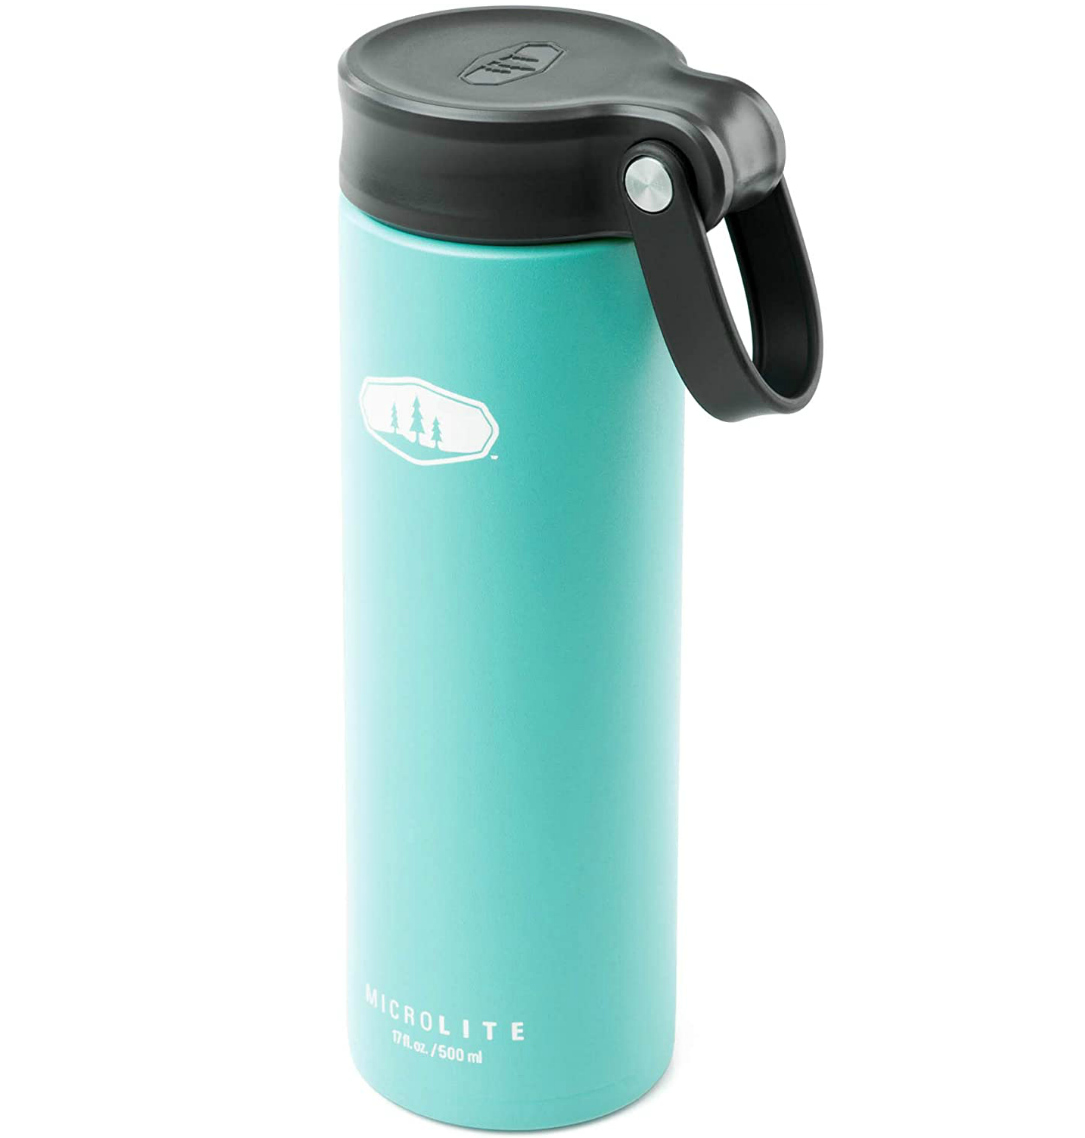 FXW LUCKY Stainless Steel Insulated Travel Mug Leakproof Vacuum Water Bottles Coffee Cup Commuter Bottle 16-Ounce 480ml Black